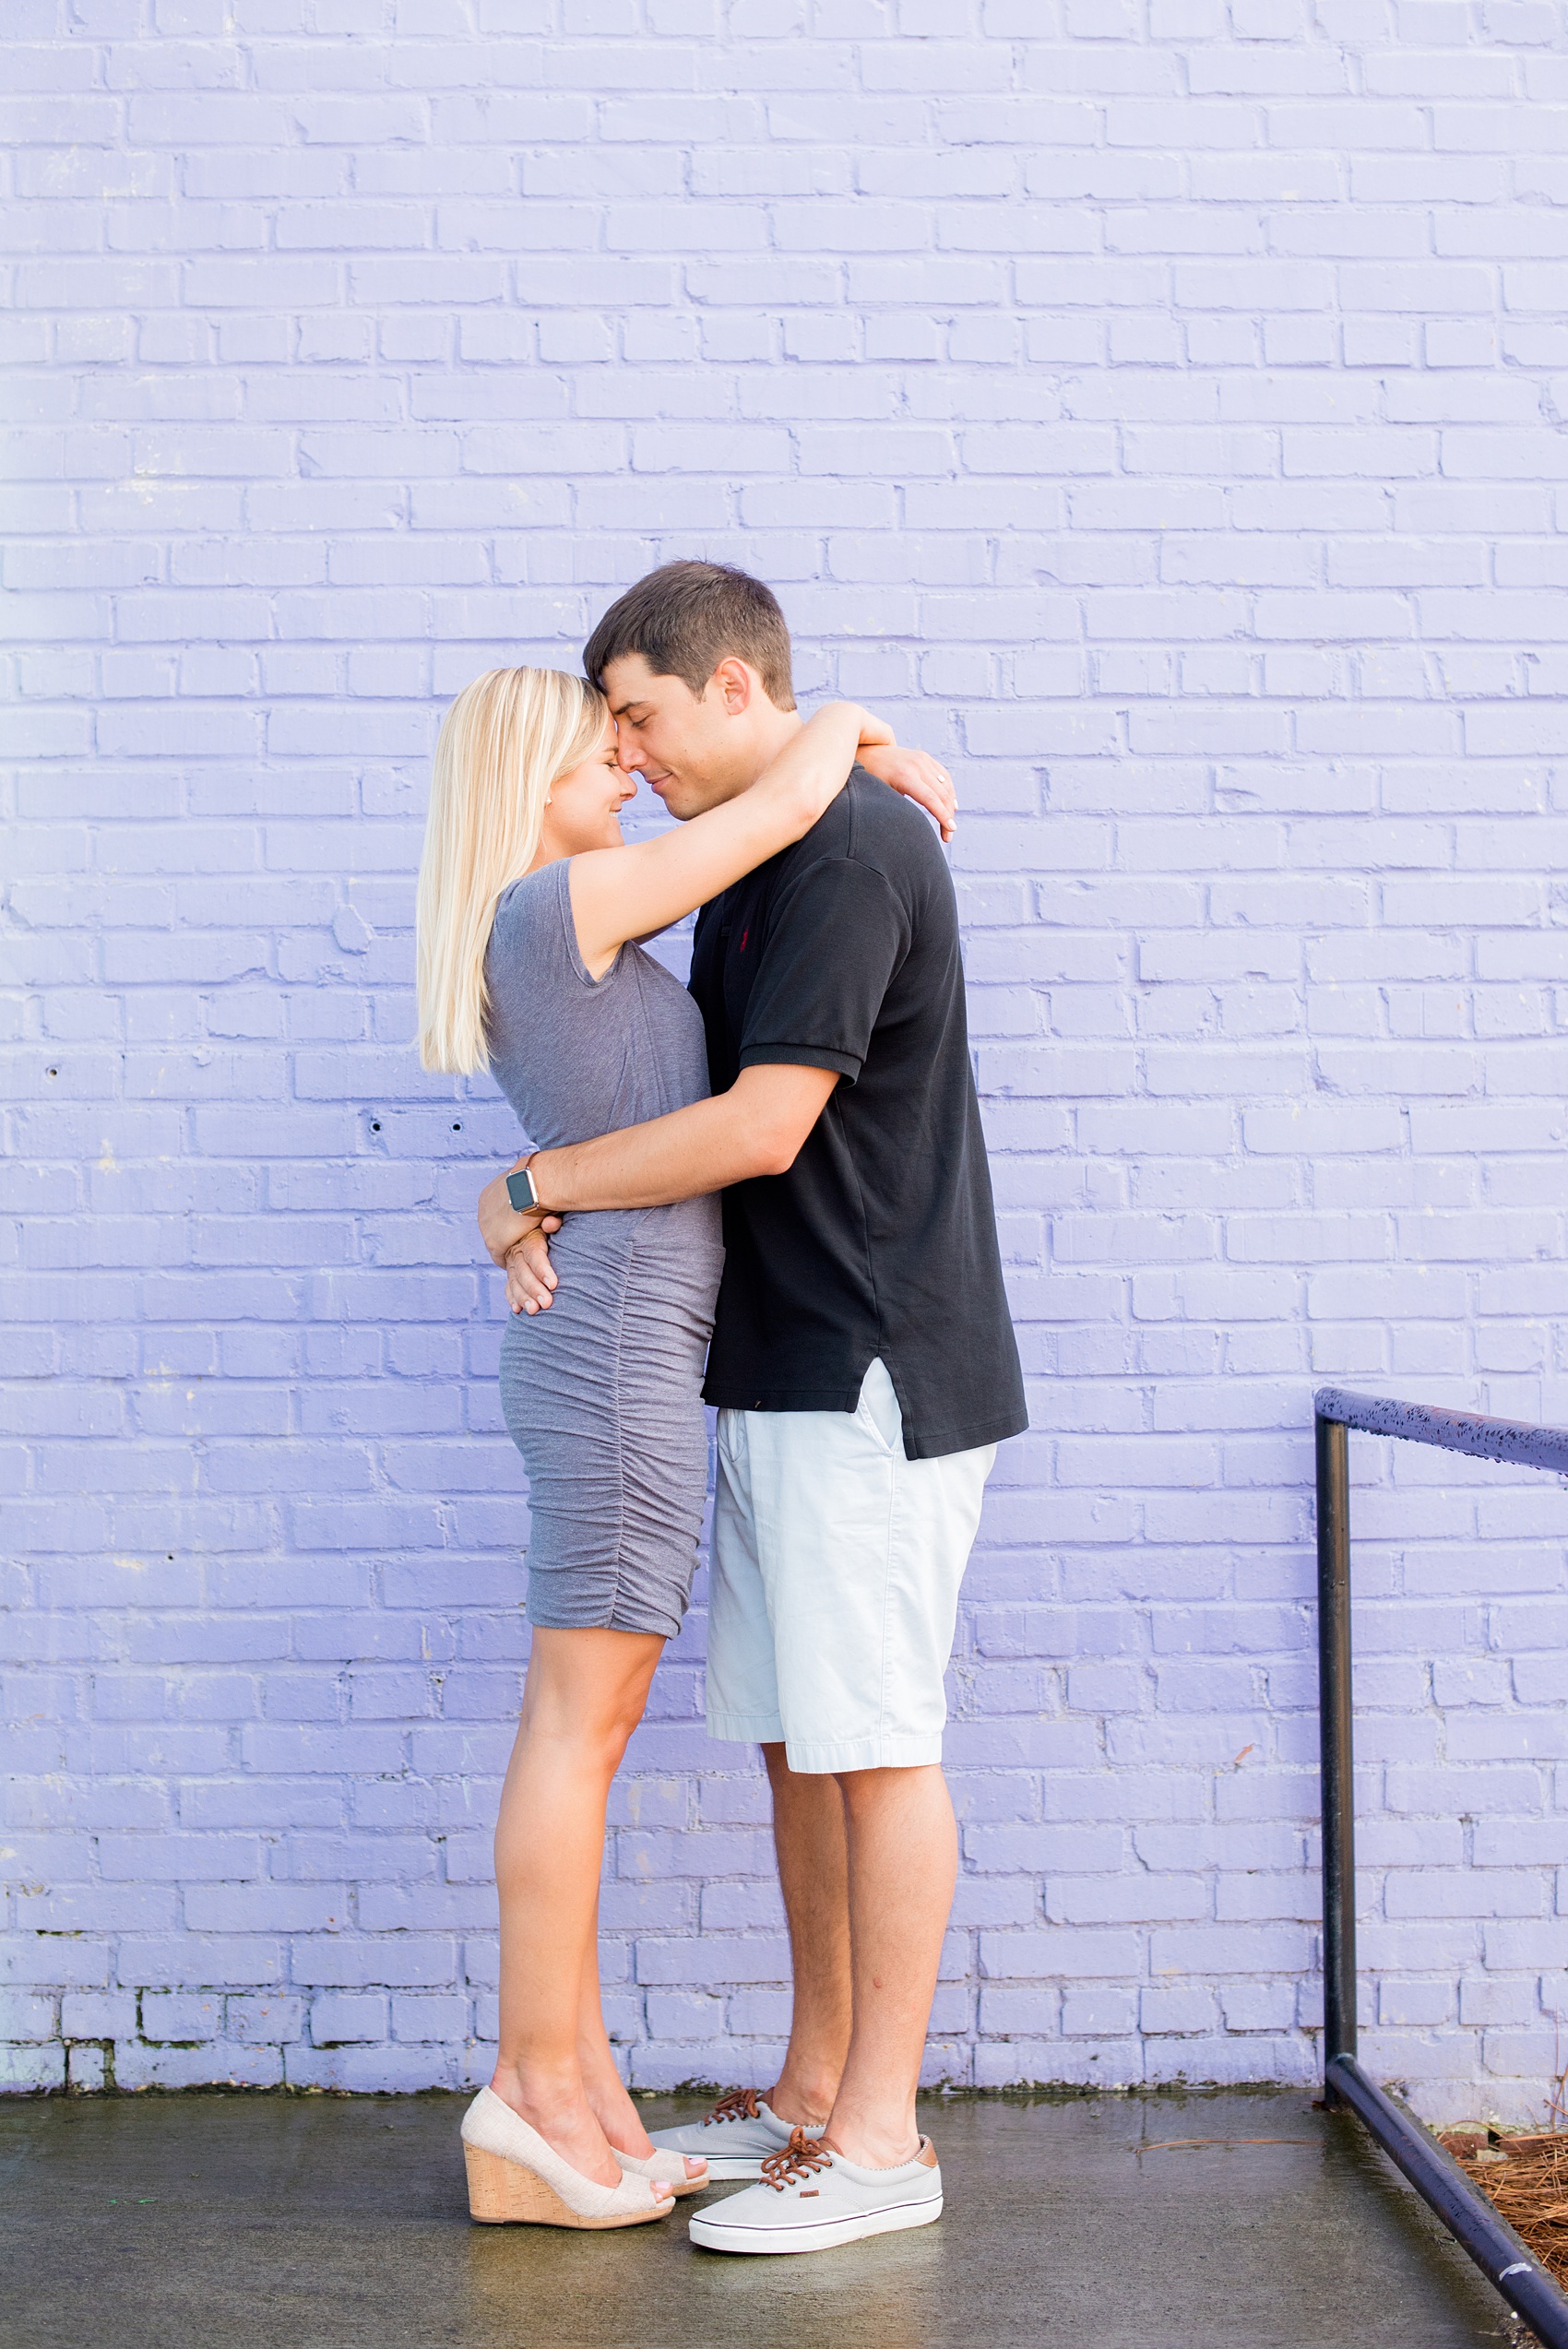 Mikkel Paige Photography pictures of a colorful engagement session in Chapel Hill North Carolina. The bride and groom hug in front of purple and light blue walls.